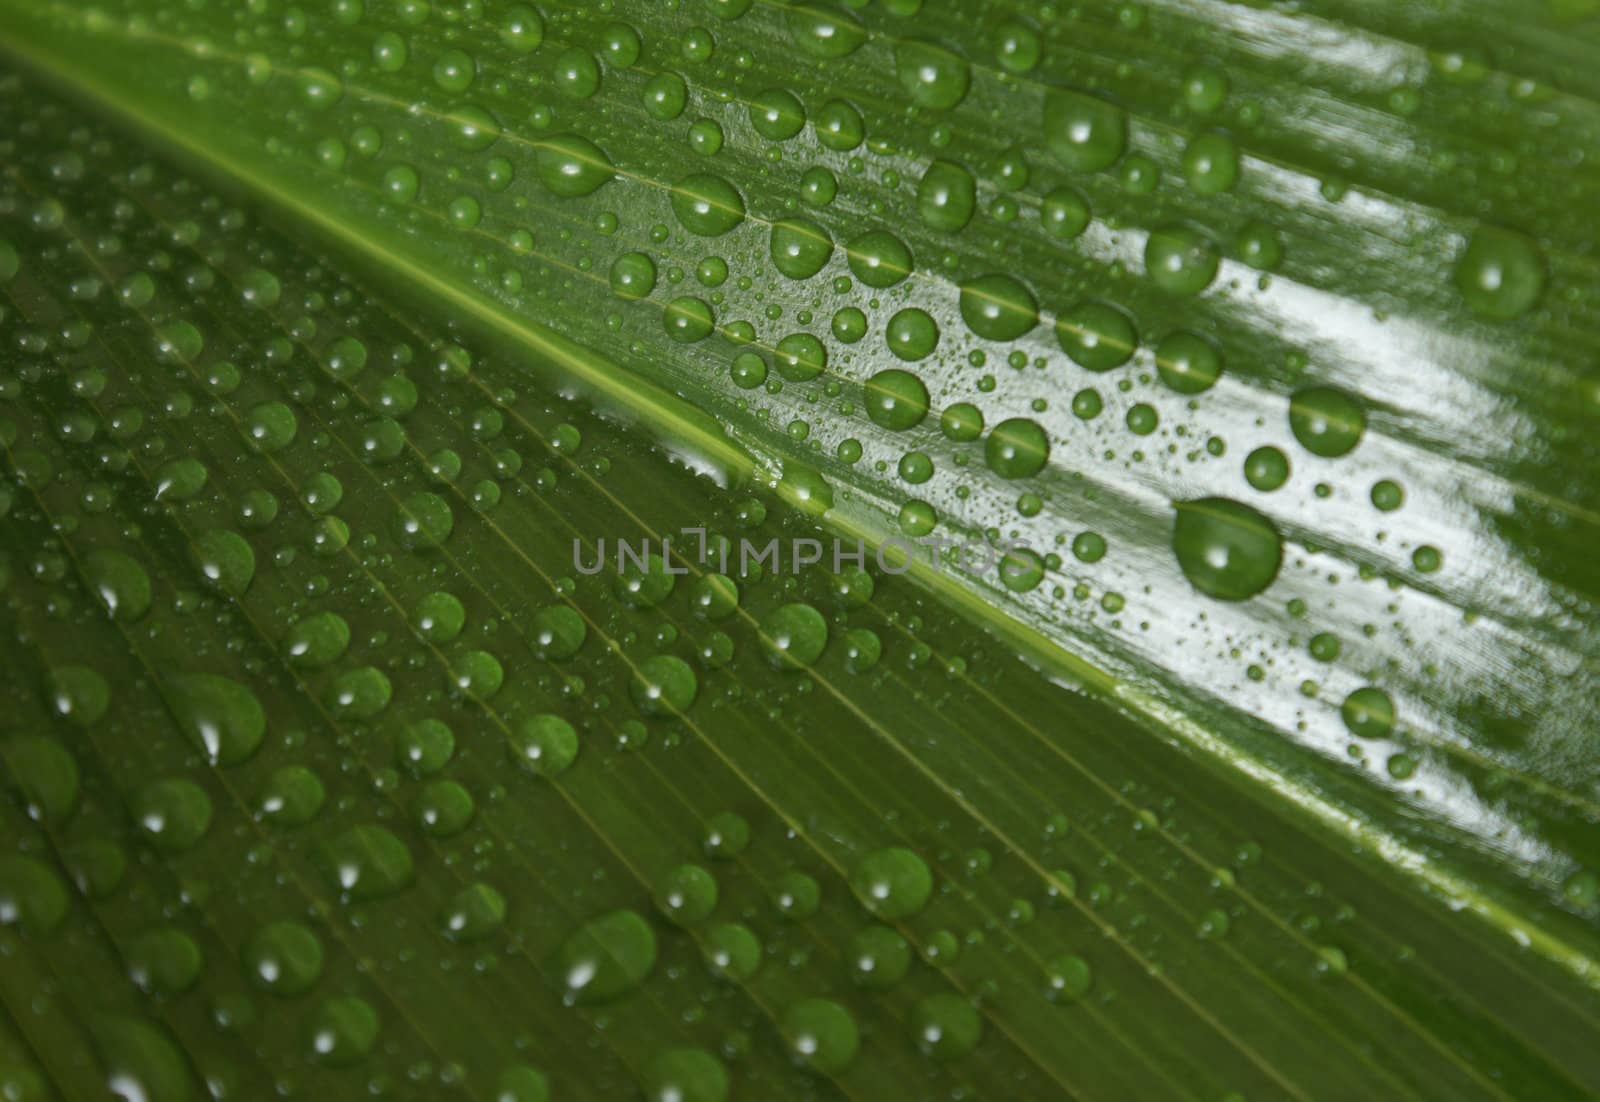 Leaf with Waterdrops by AlphaBaby